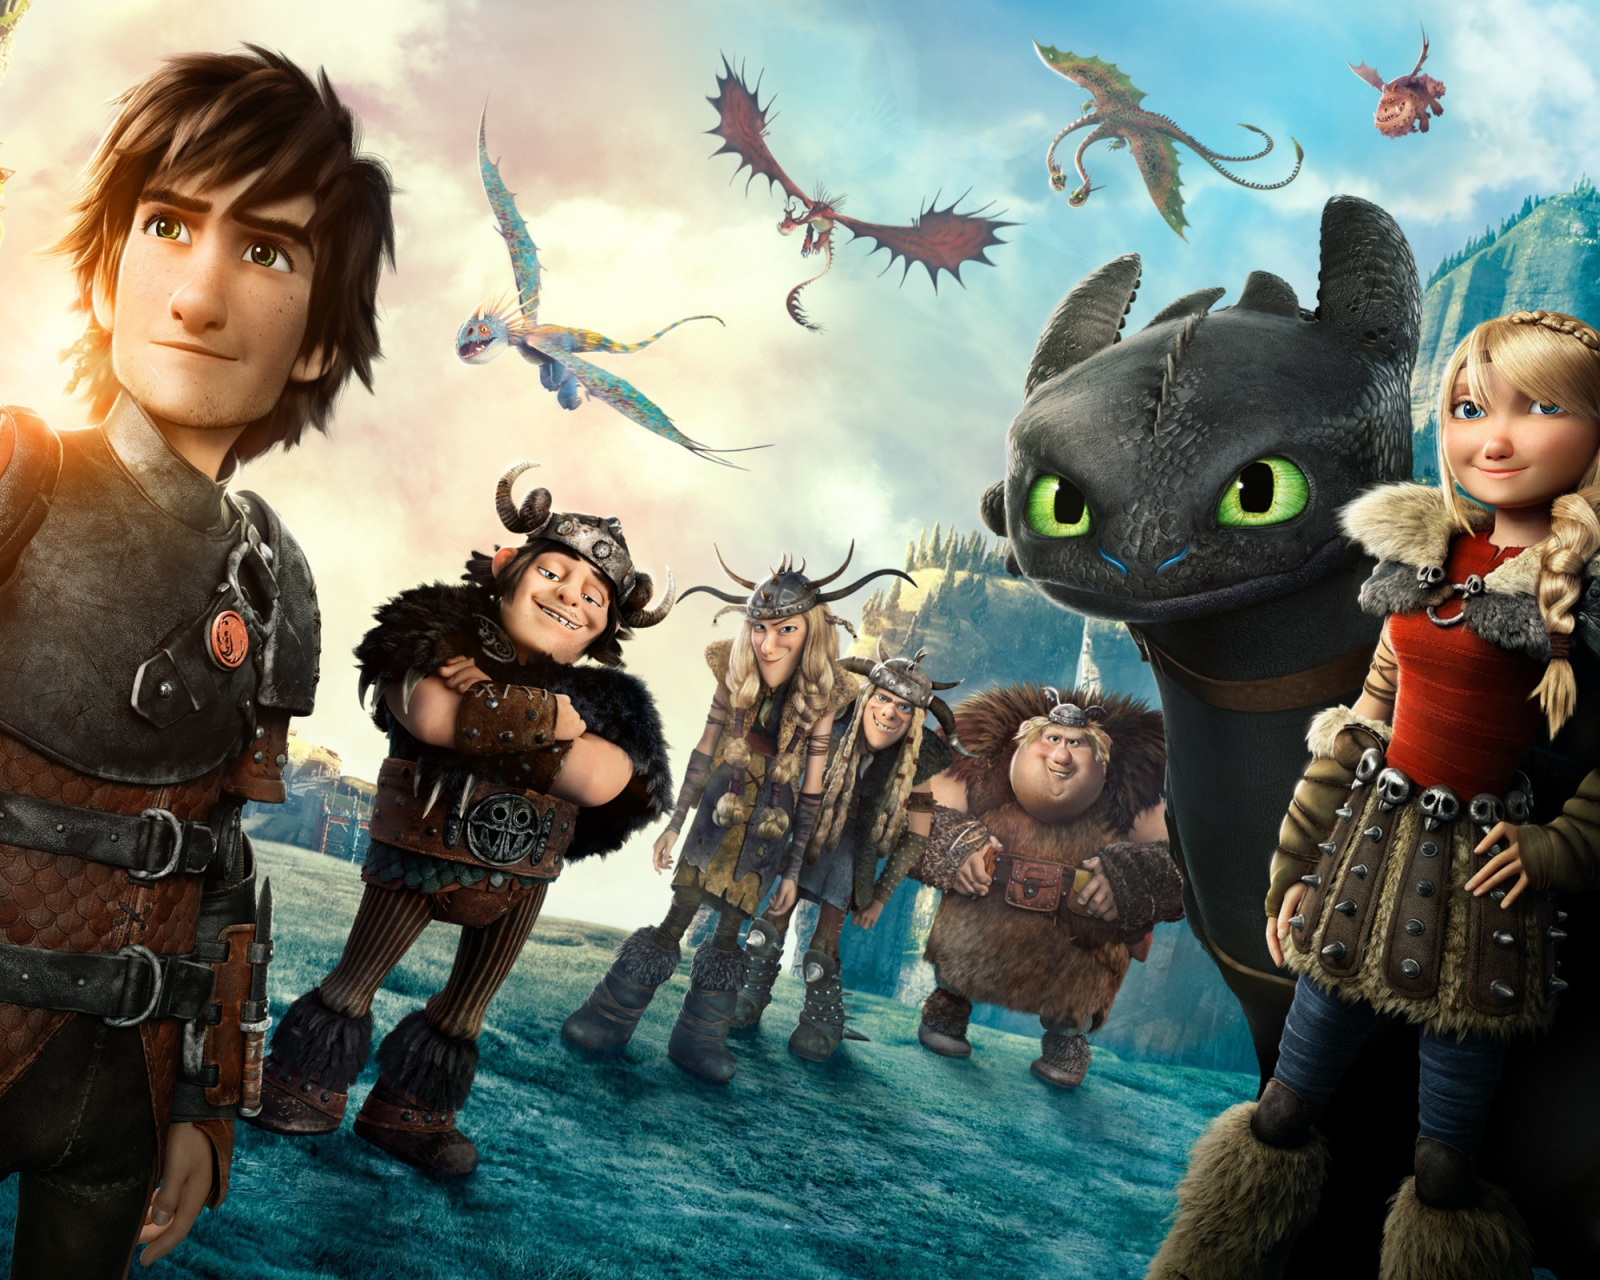 movie, how to train your dragon 2, toothless (how to train your dragon), hiccup (how to train your dragon), snotlout (how to train your dragon), tuffnut (how to train your dragon), astrid (how to train your dragon), ruffnut (how to train your dragon), fishlegs (how to train your dragon), how to train your dragon